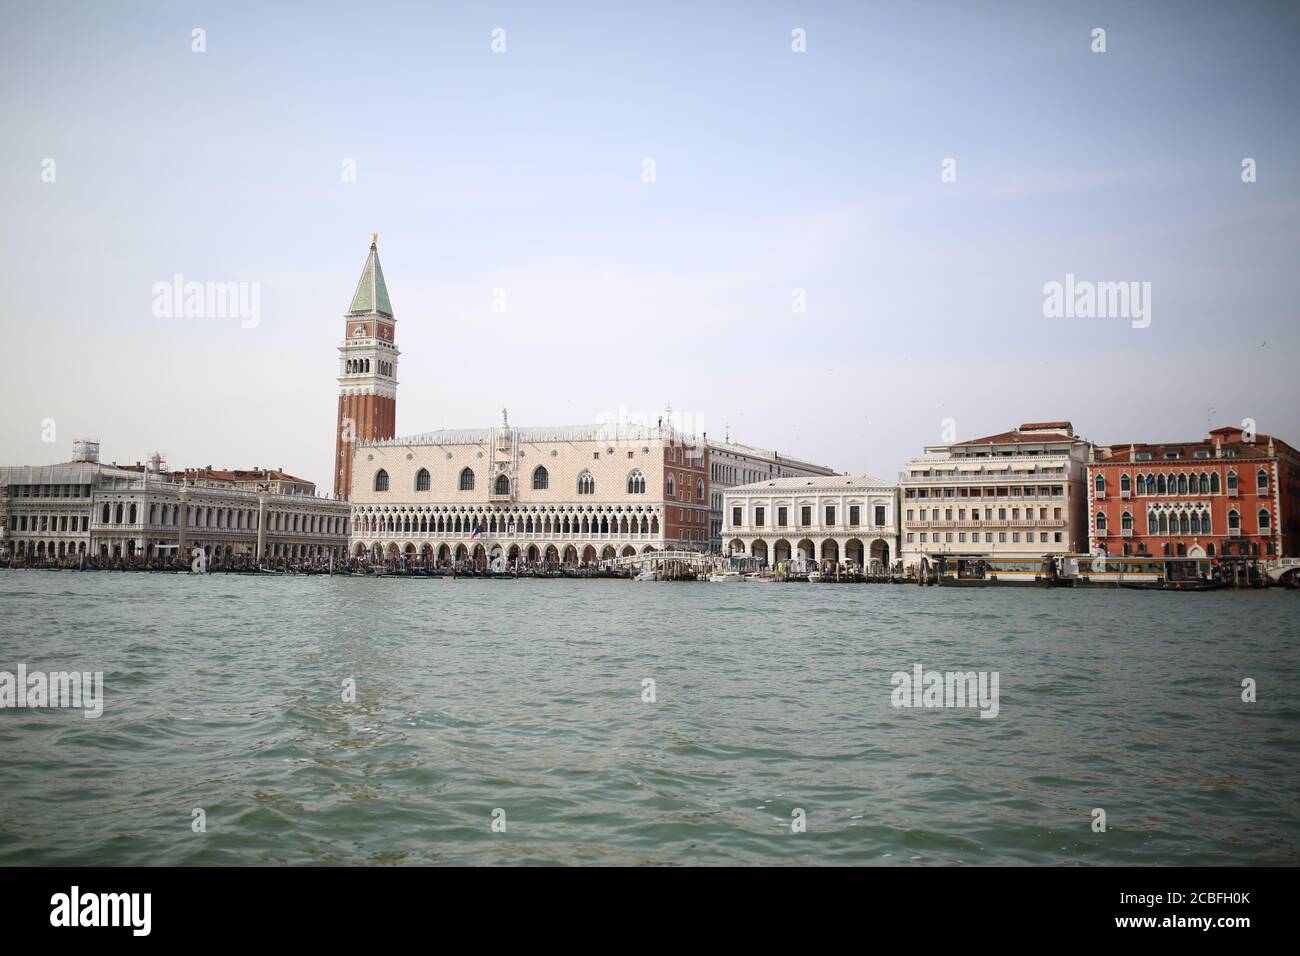 View Of St Mark's Basilica In Venice, Italy Stock Photo